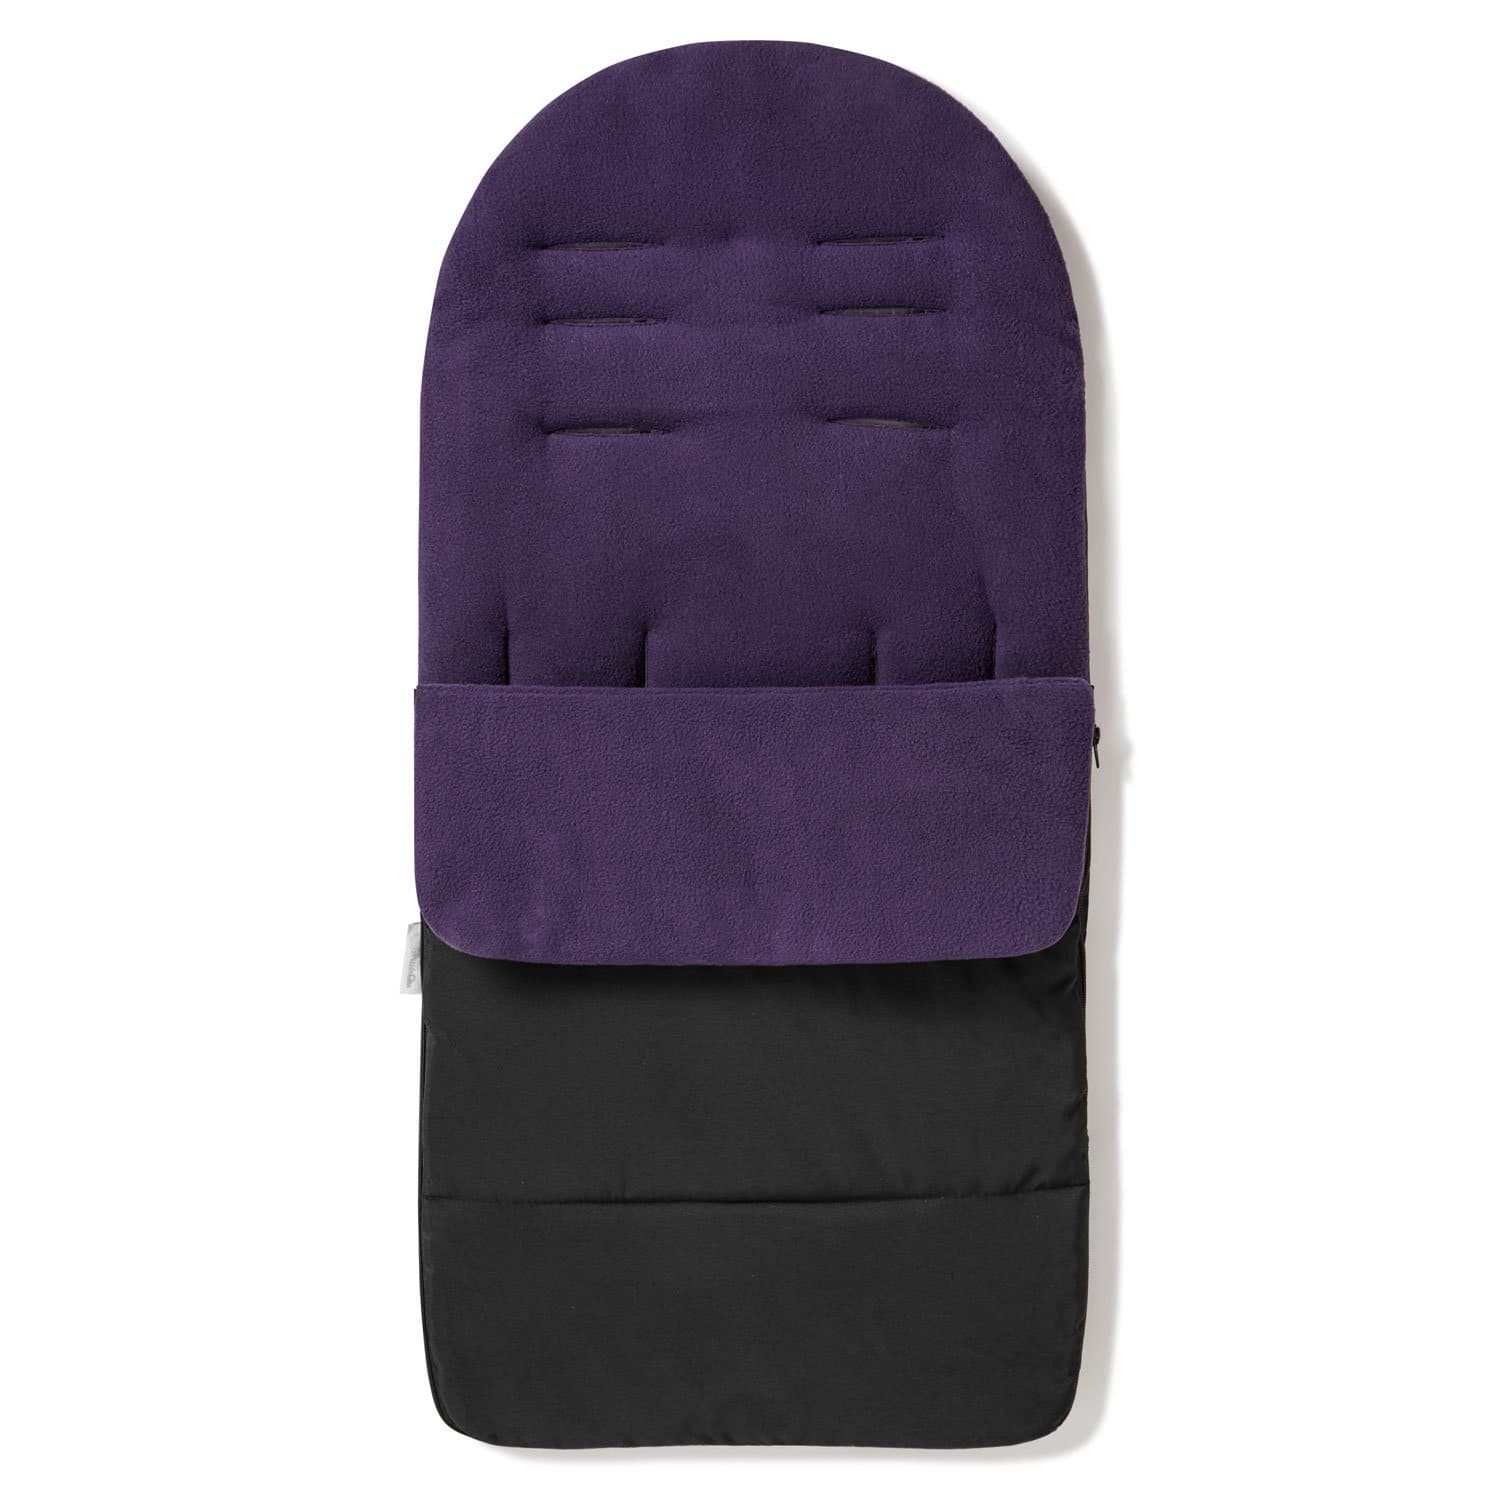 Premium Footmuff / Cosy Toes Compatible with Cybex - Plum Purple / Fits All Models | For Your Little One